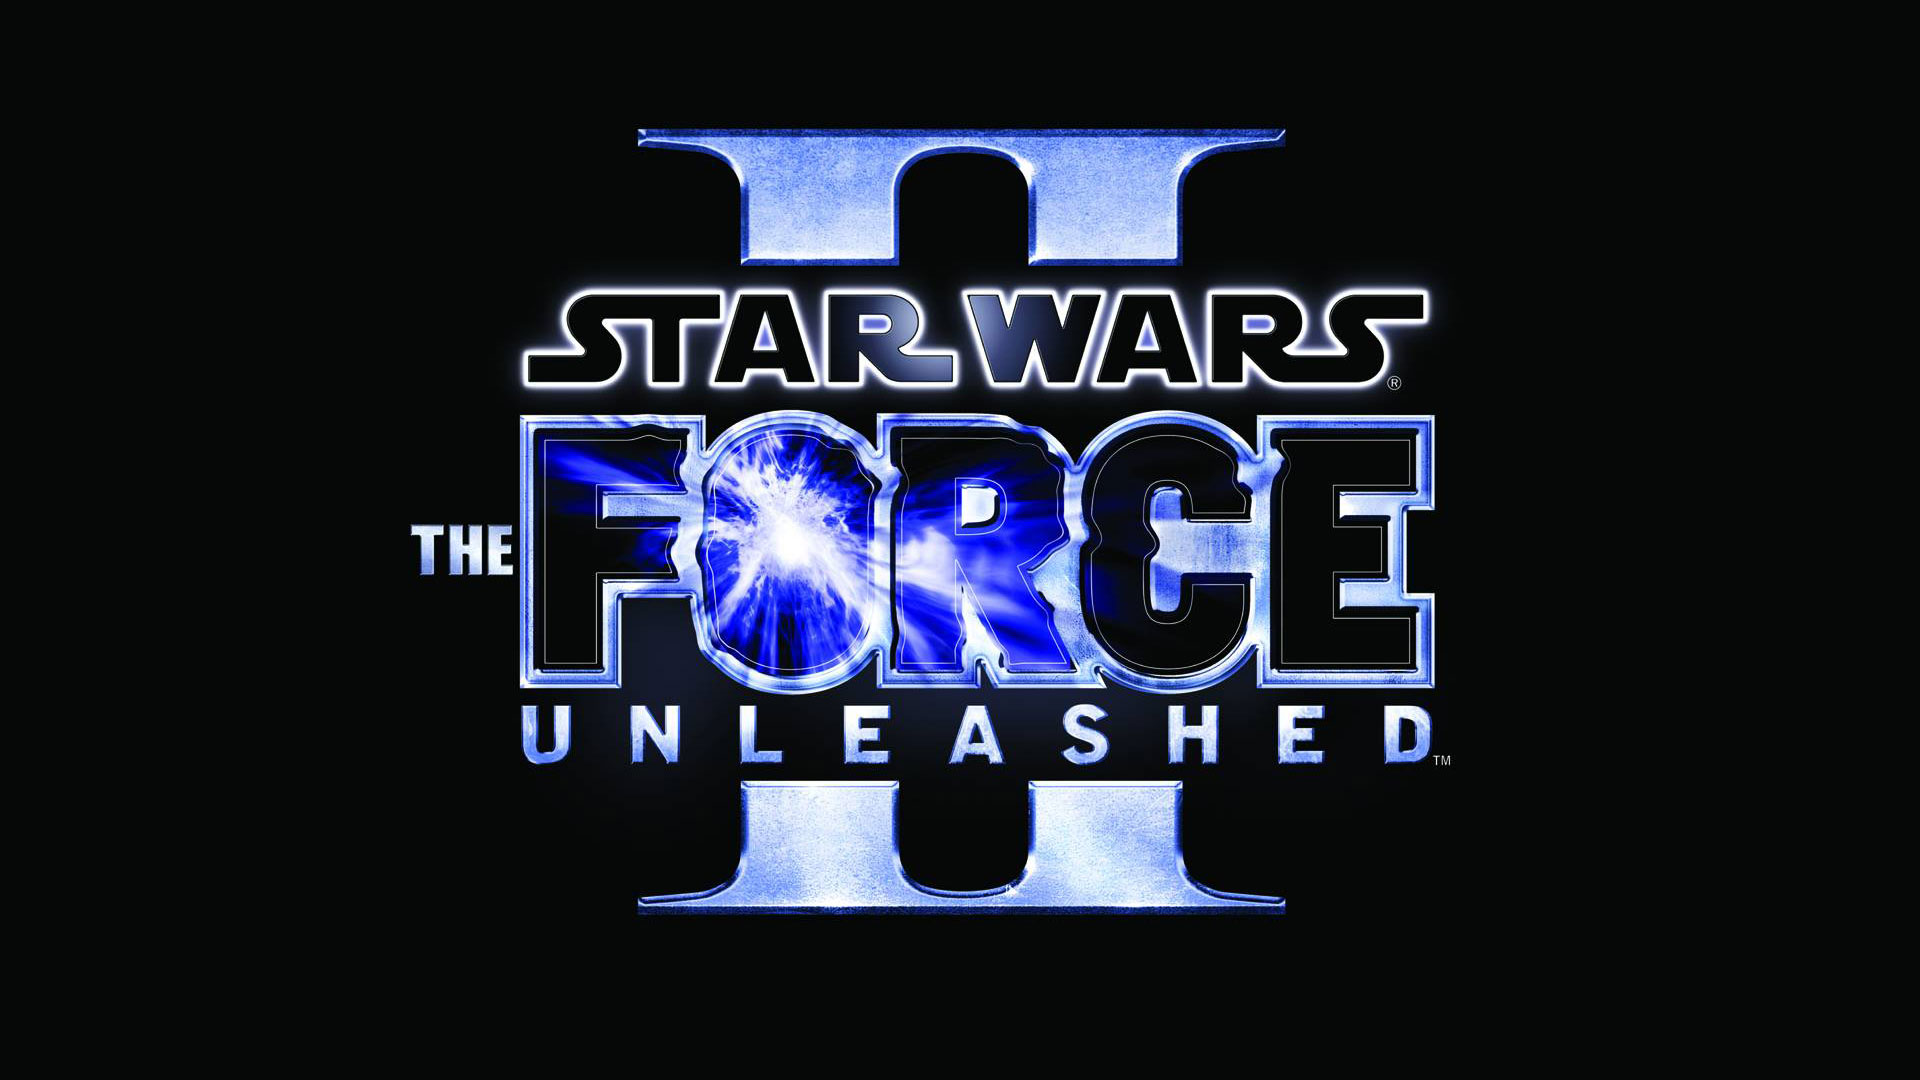 video game, star wars: the force unleashed ii, star wars